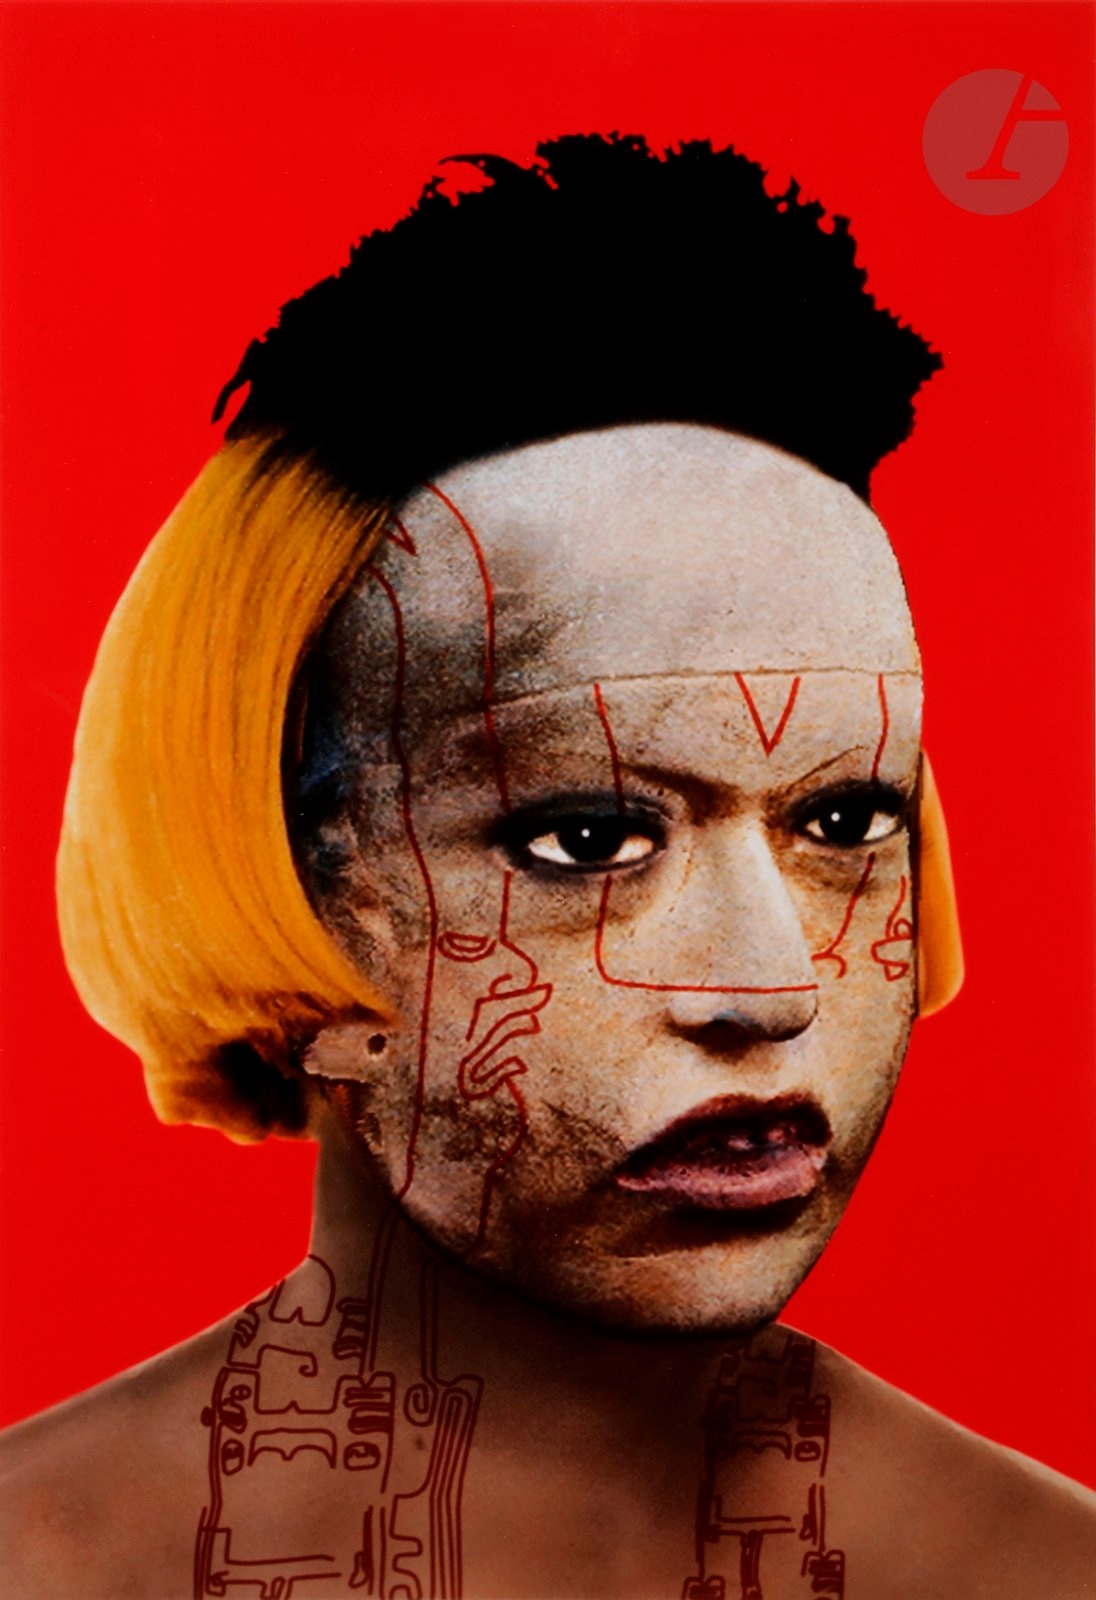 Self-hybridations précolombiennes by Orlan, 1998